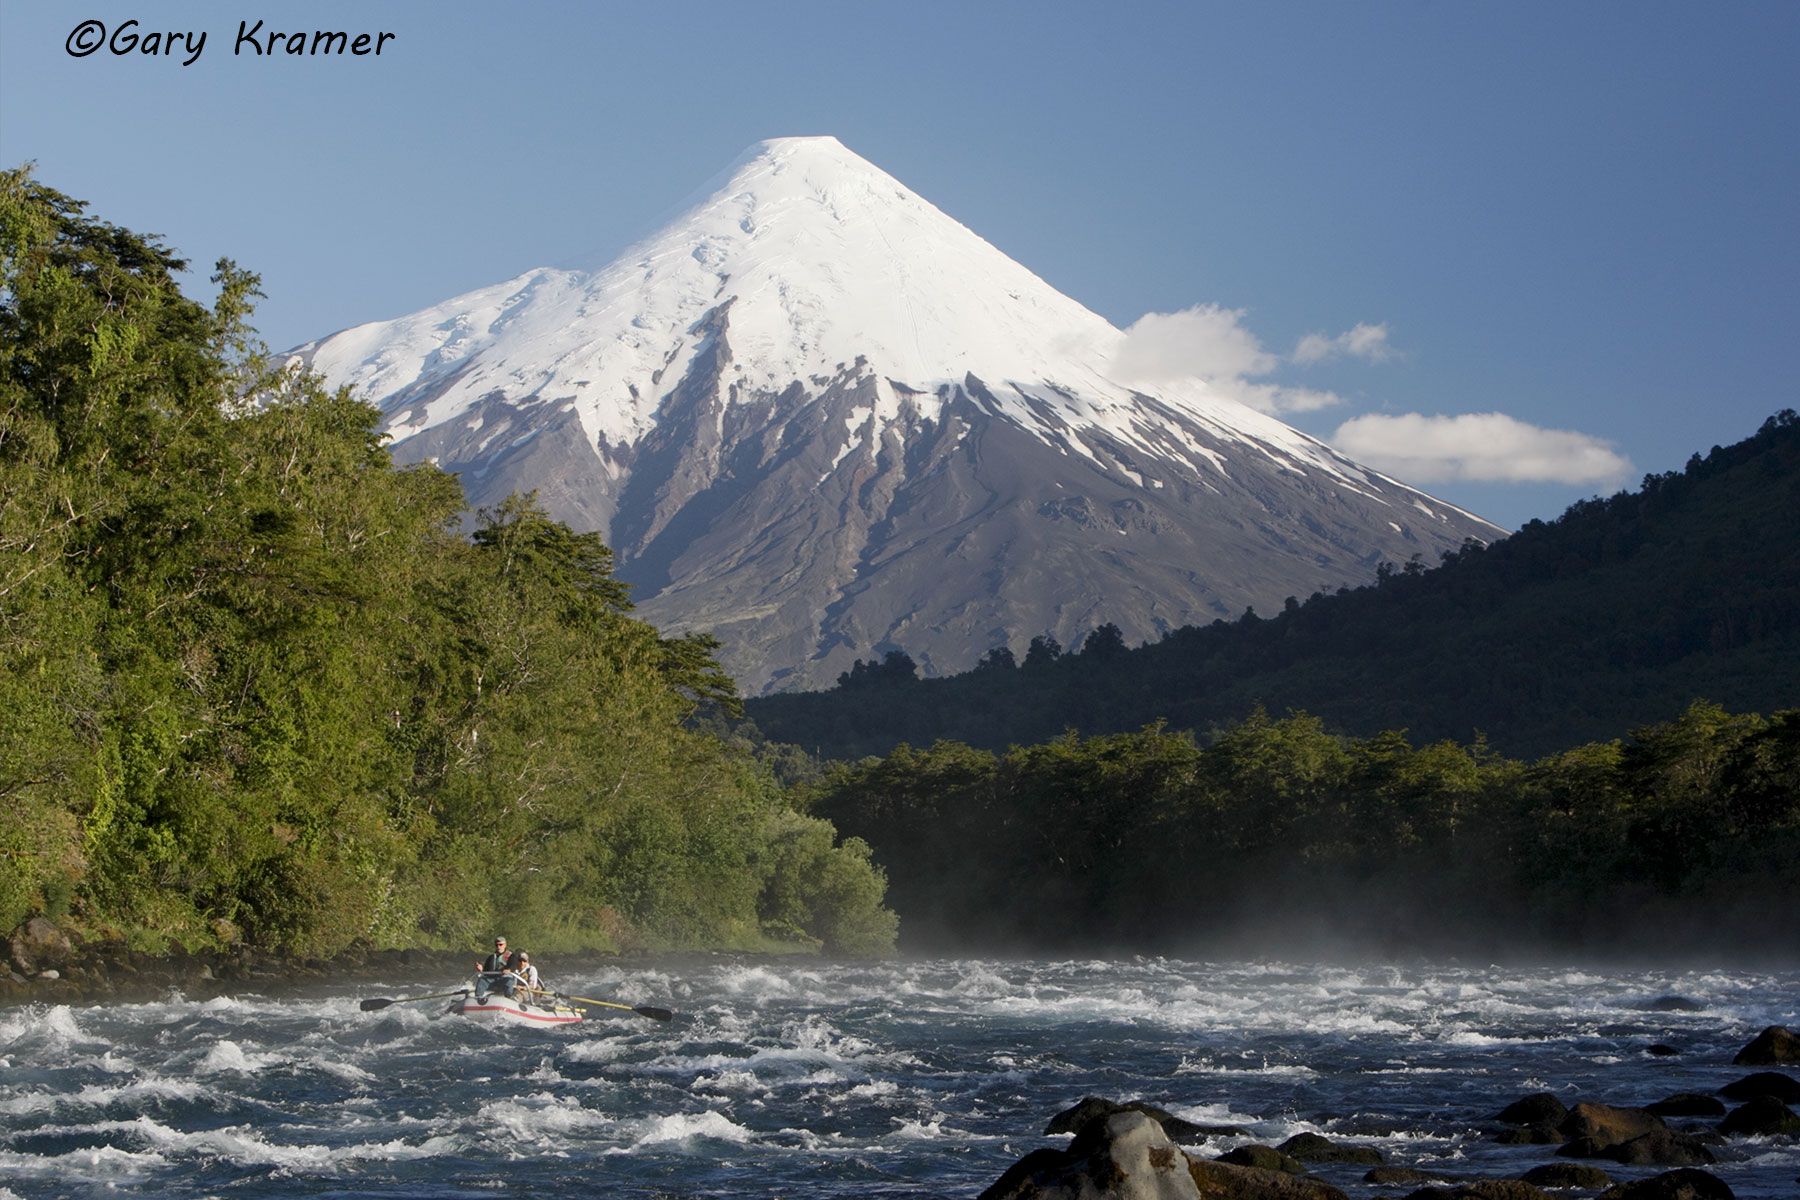 Running rapids in a rubber raft, Petrohue River, Chile - NFTCf#023d